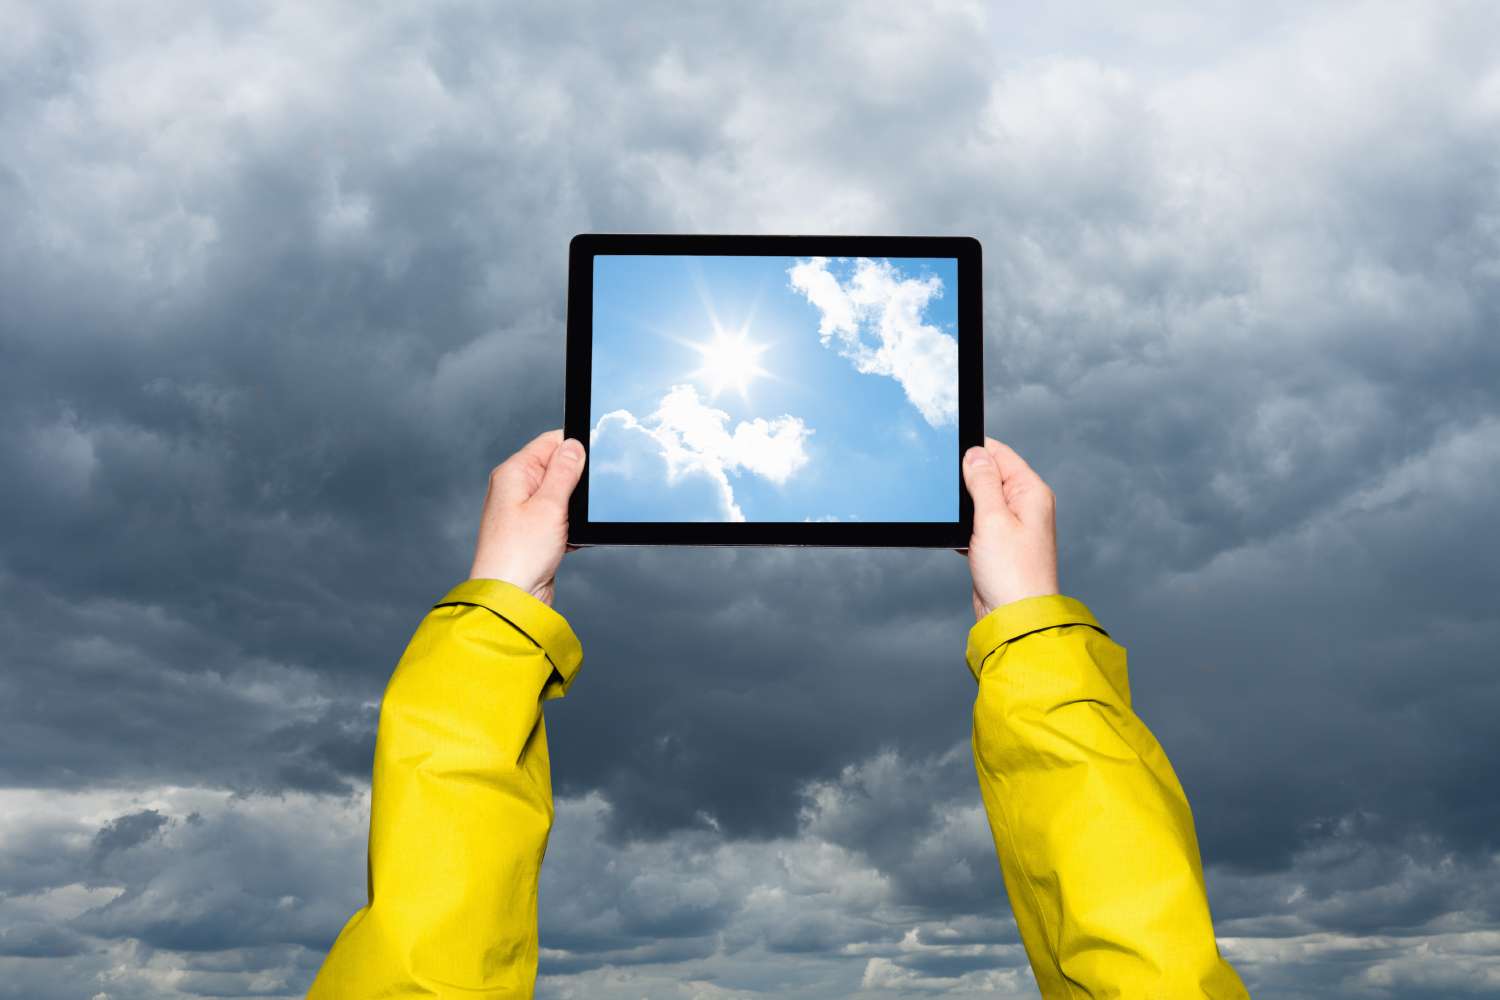 Child looking at a storm on a tablet